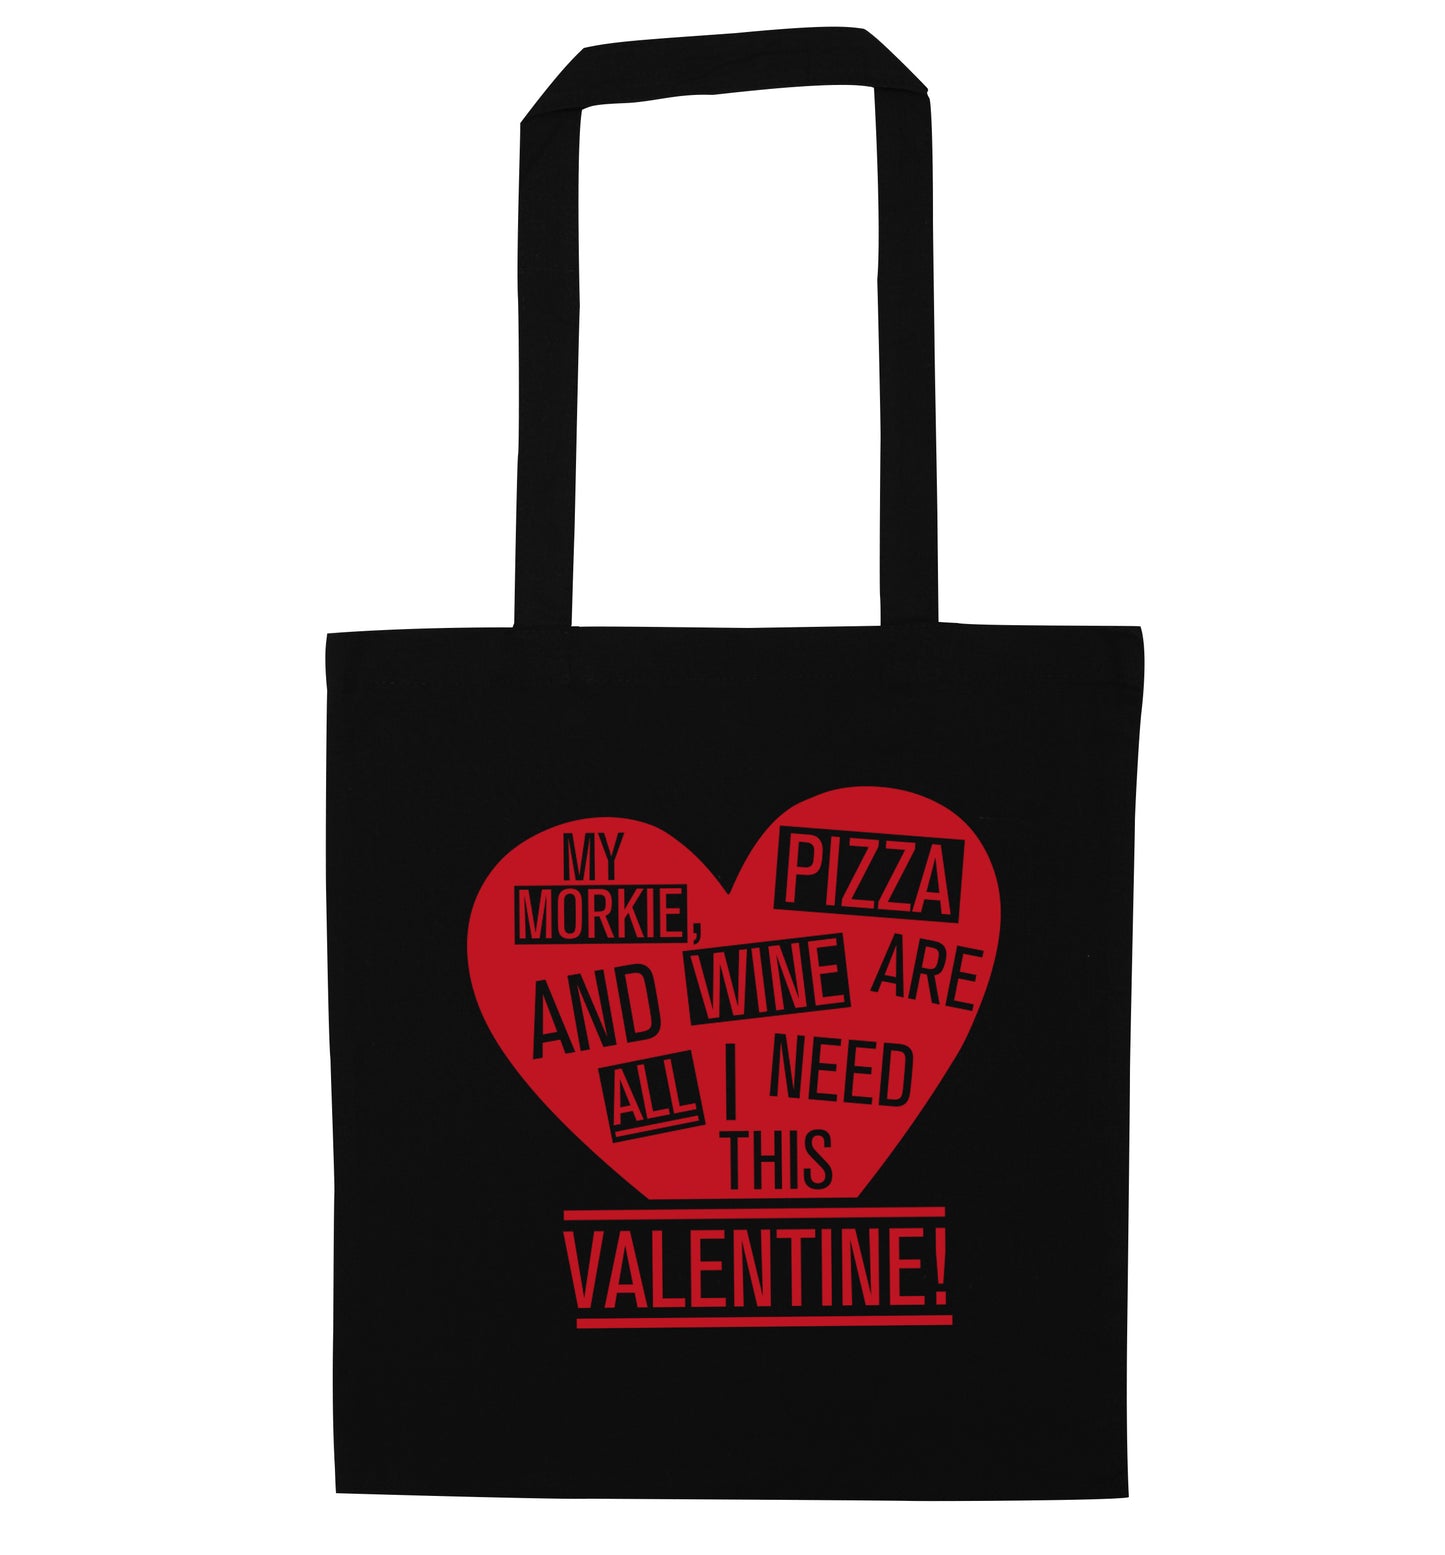 My morkie, pizza and wine are all I need this valentine! black tote bag